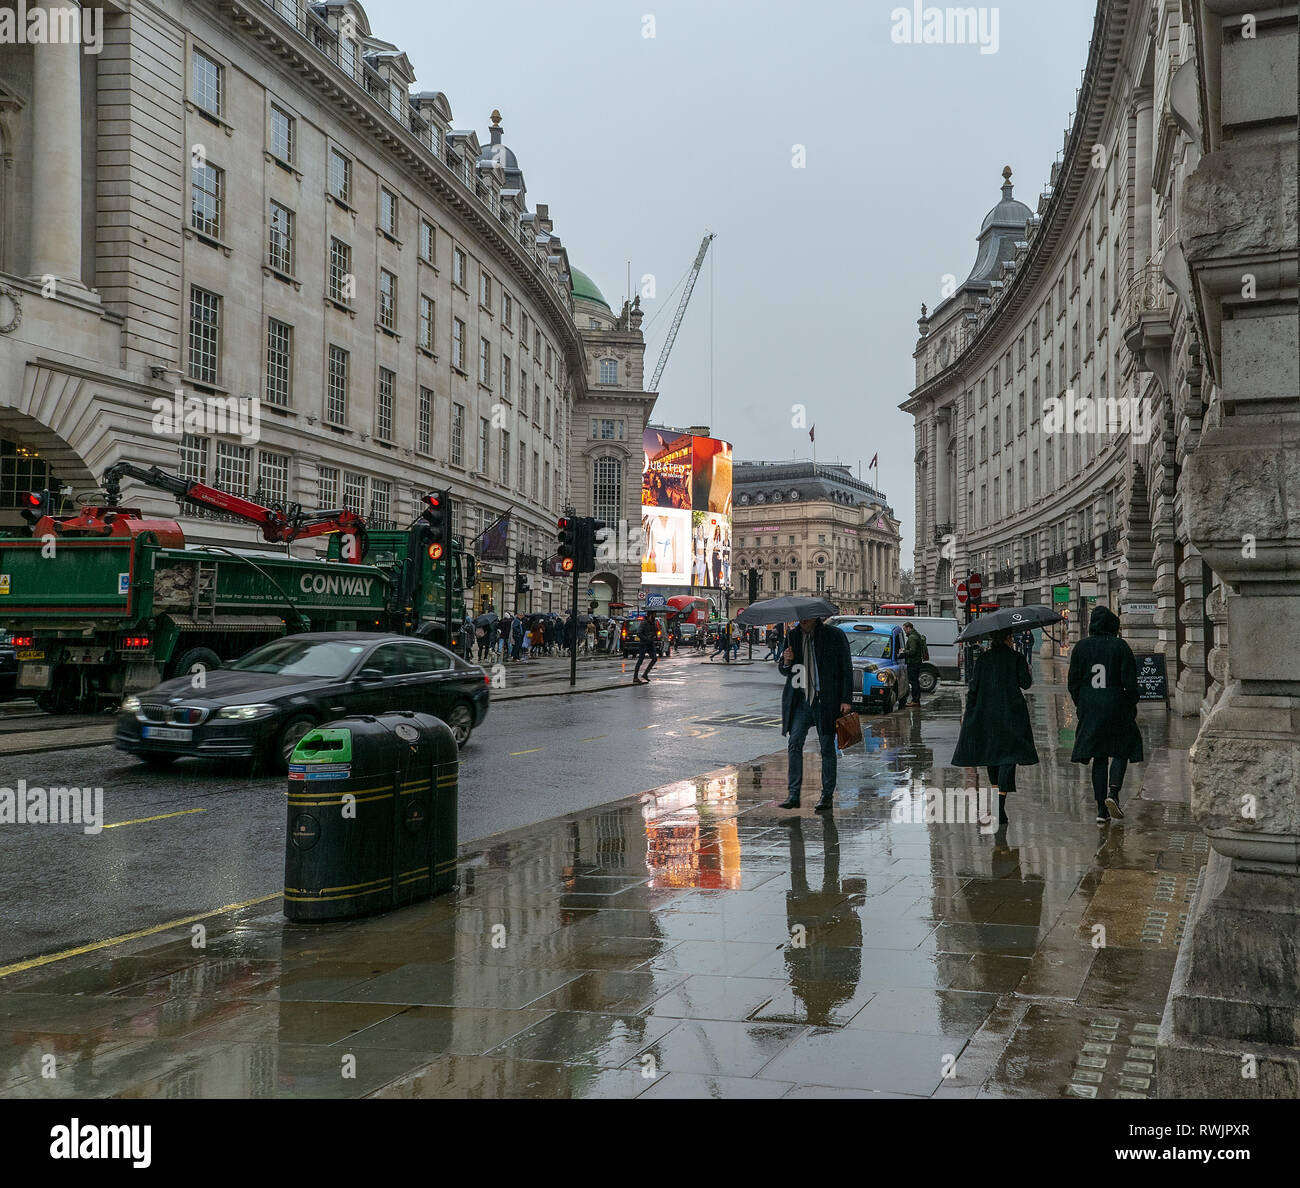 Piccadilly Circus, London in the rain showing the reflections on the ...